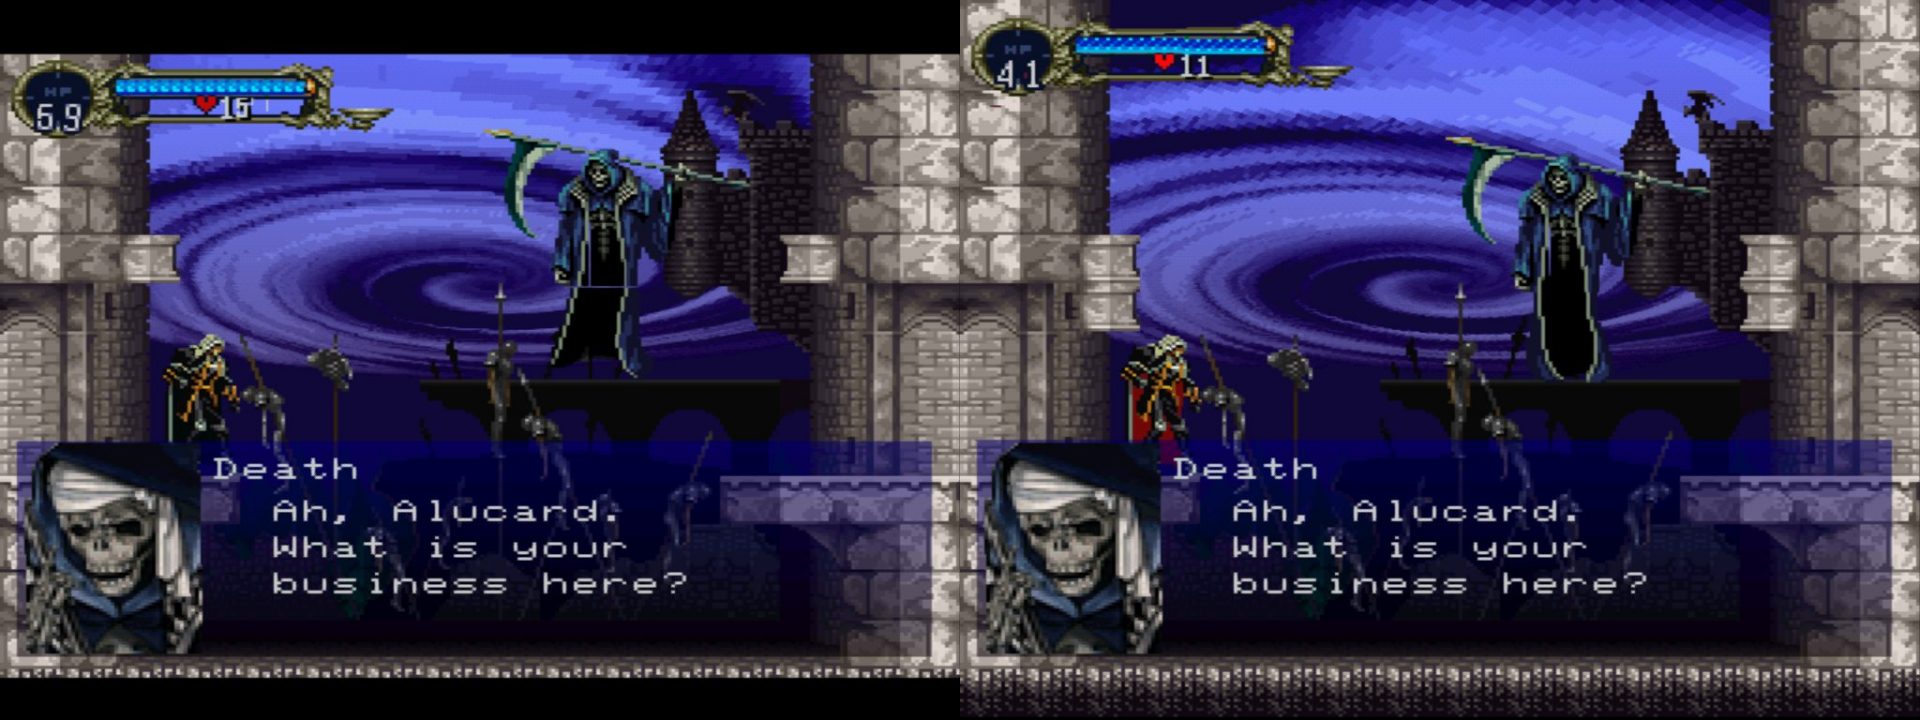 castlevania symphony of the night screen issues